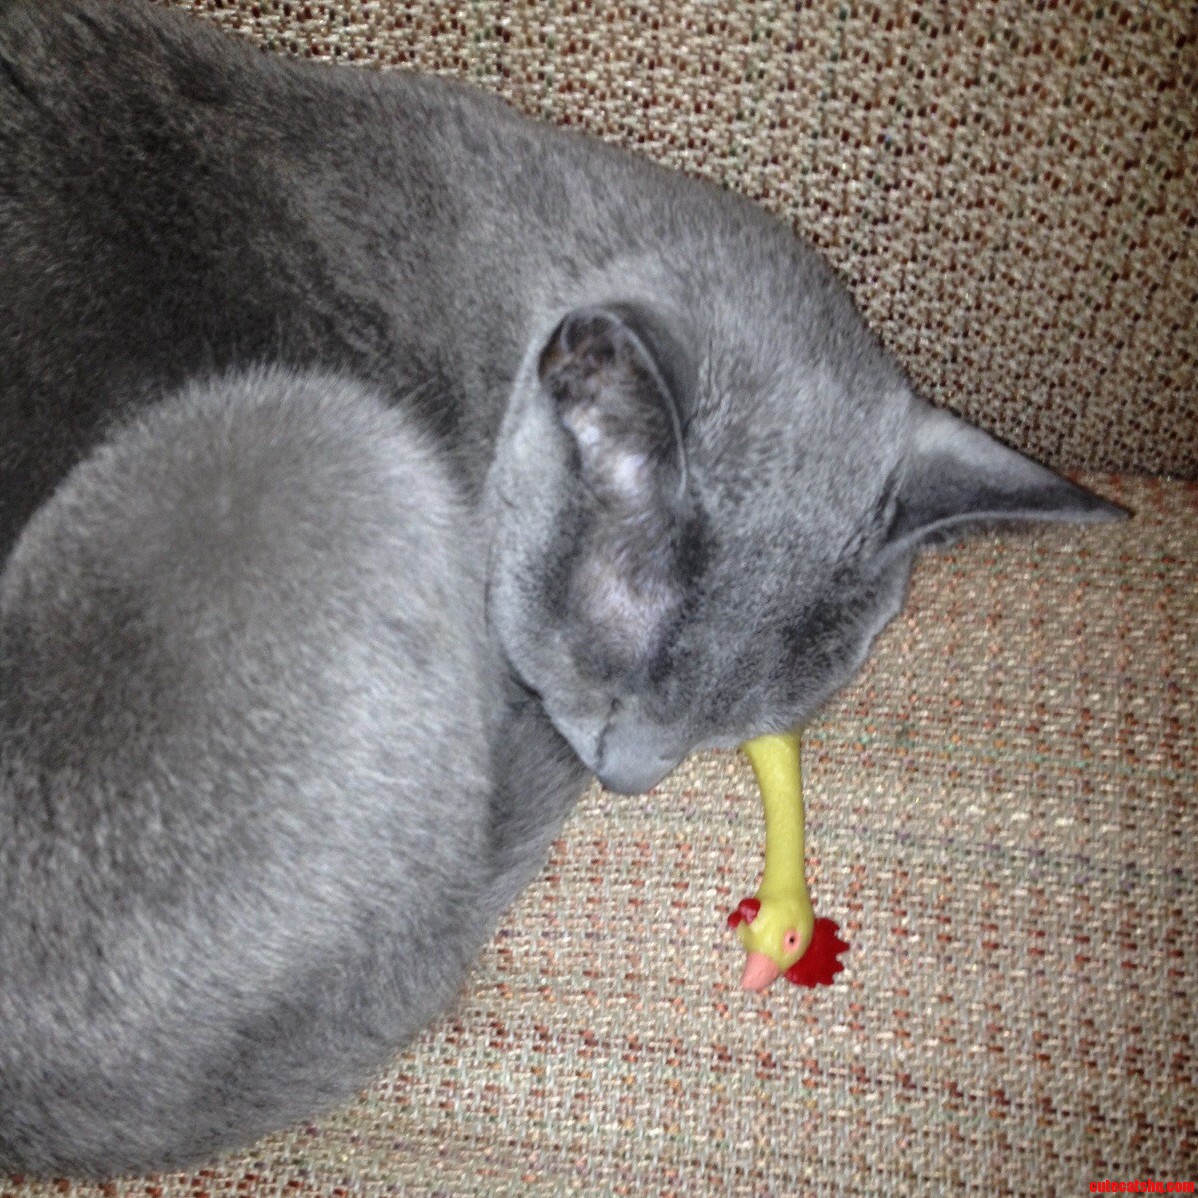 Napping With A Rubber Chicken